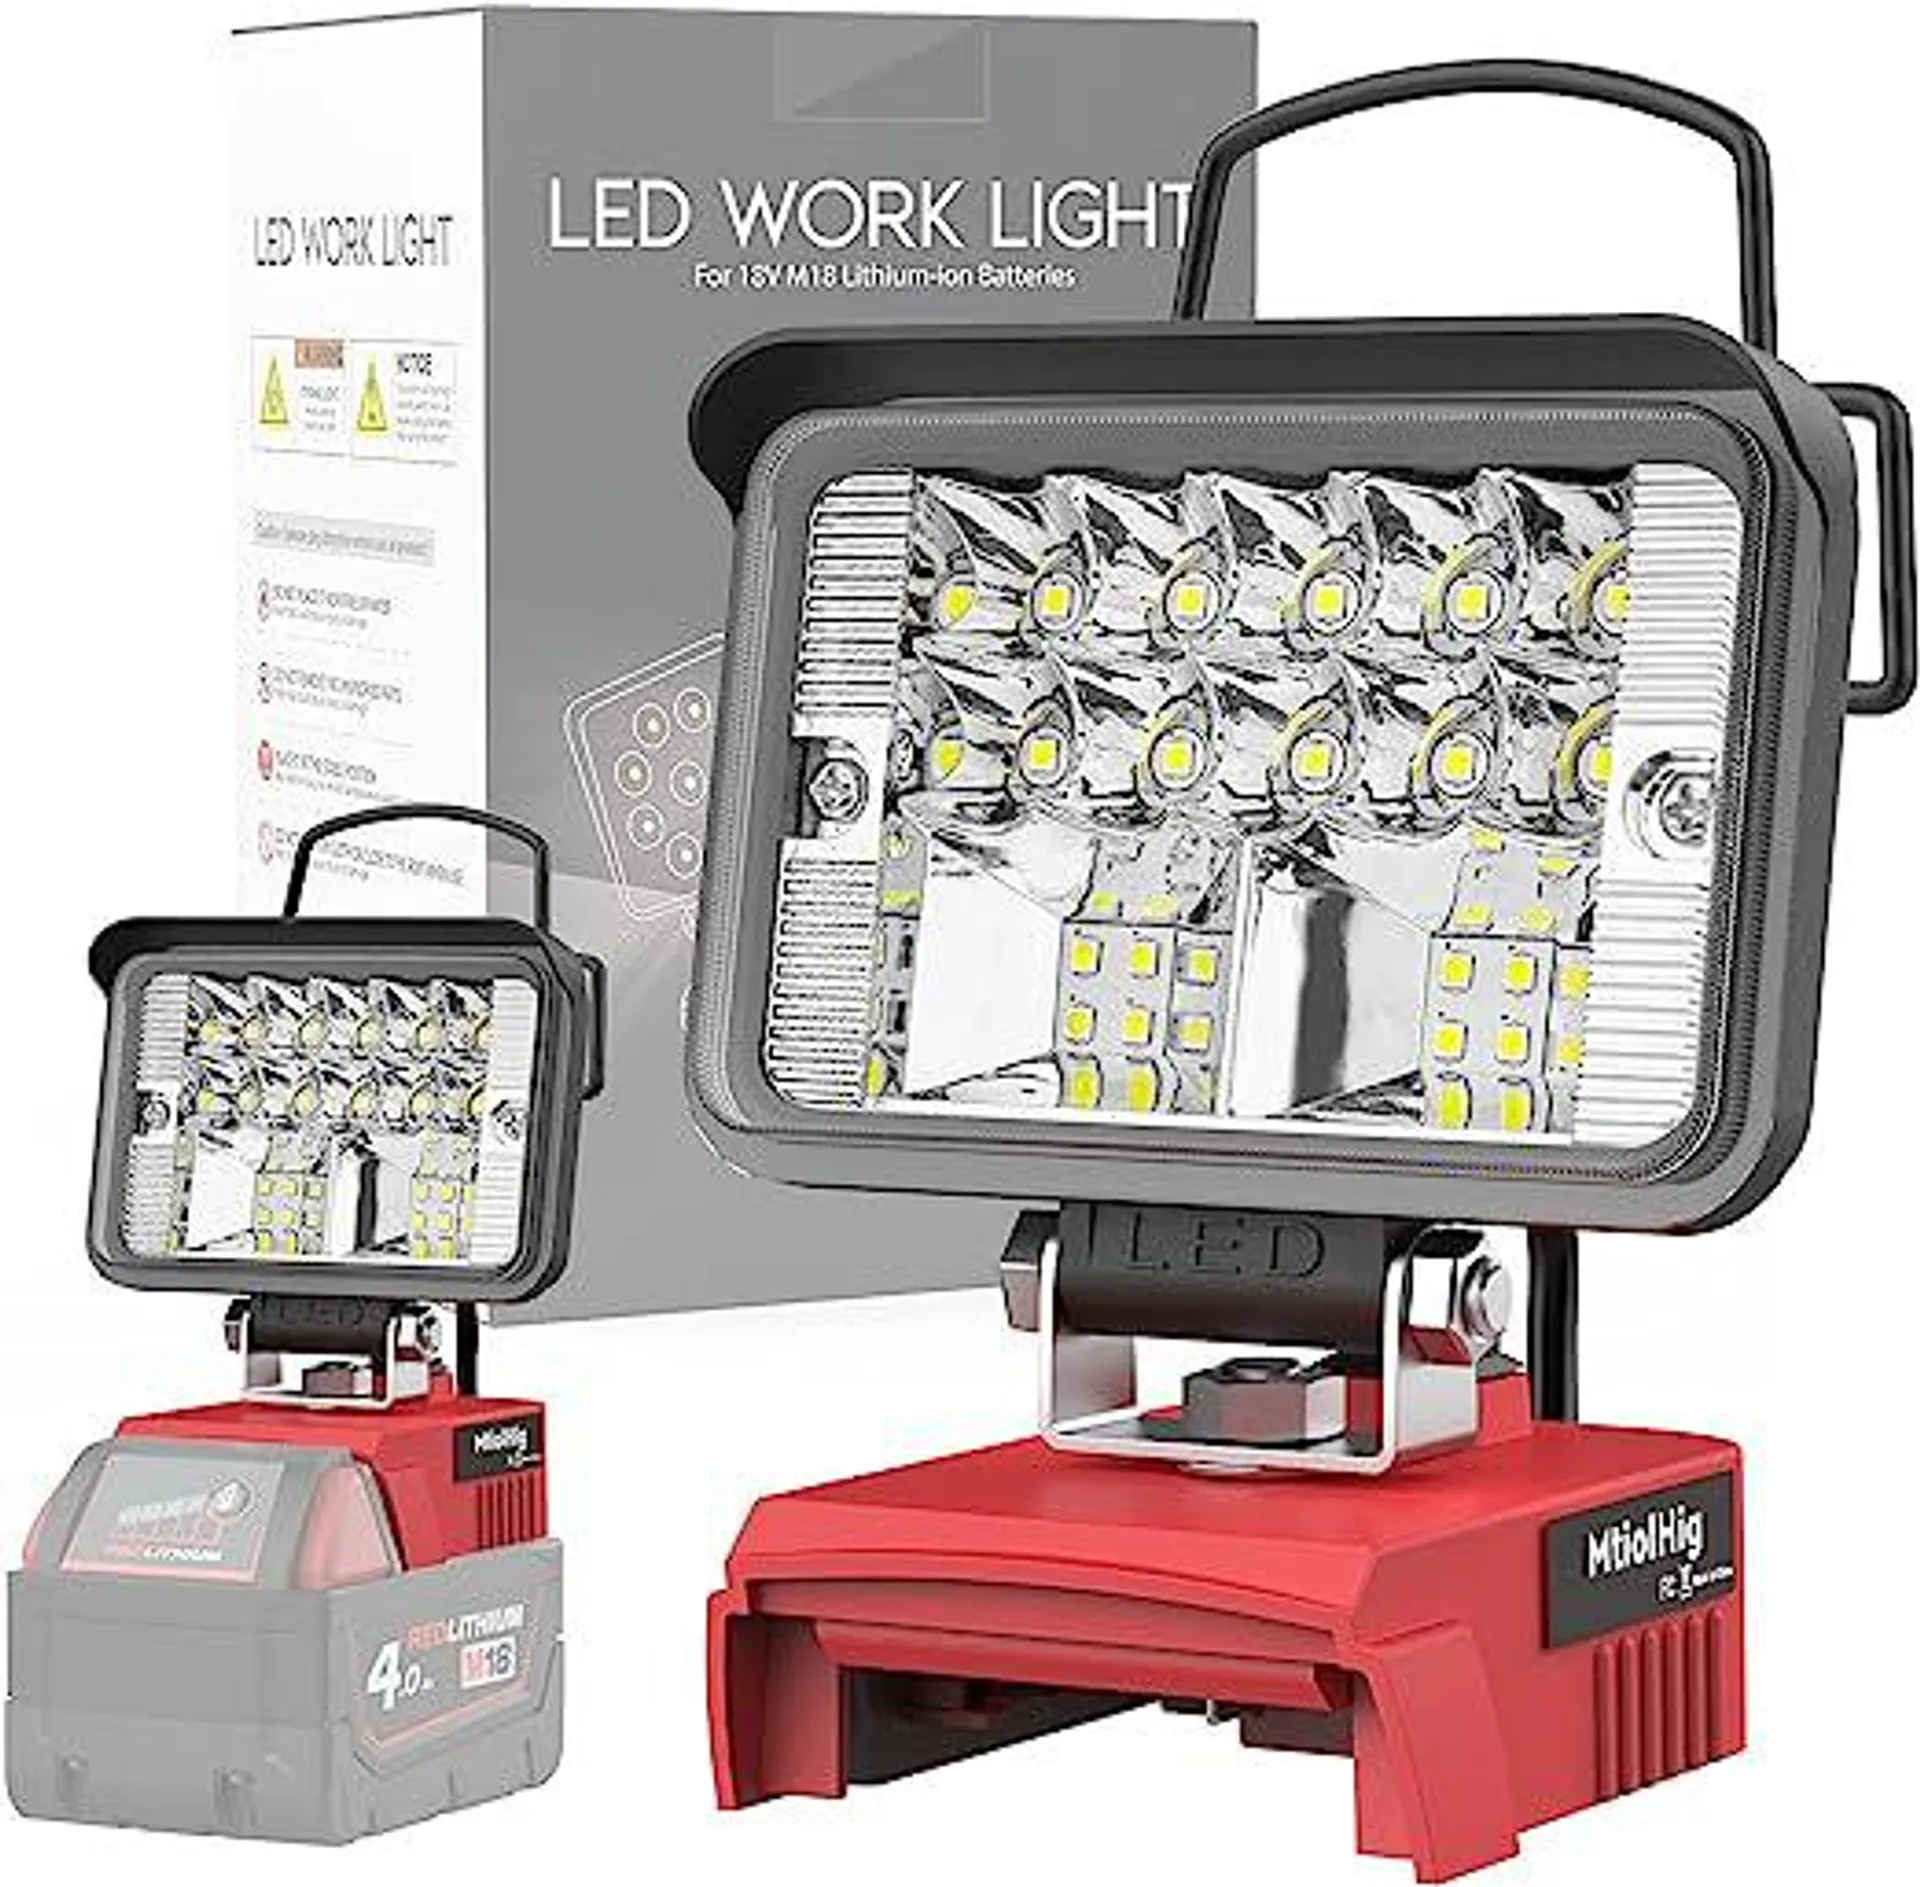 Mtiolhig LED Work Lights for Milwaukee m18 Battery, 12W 1200Lumens Battery Powered Cordless Portable Shop Light LED Job Site & Security Light with USB & Type-C Charging Port and Low Voltage Protection